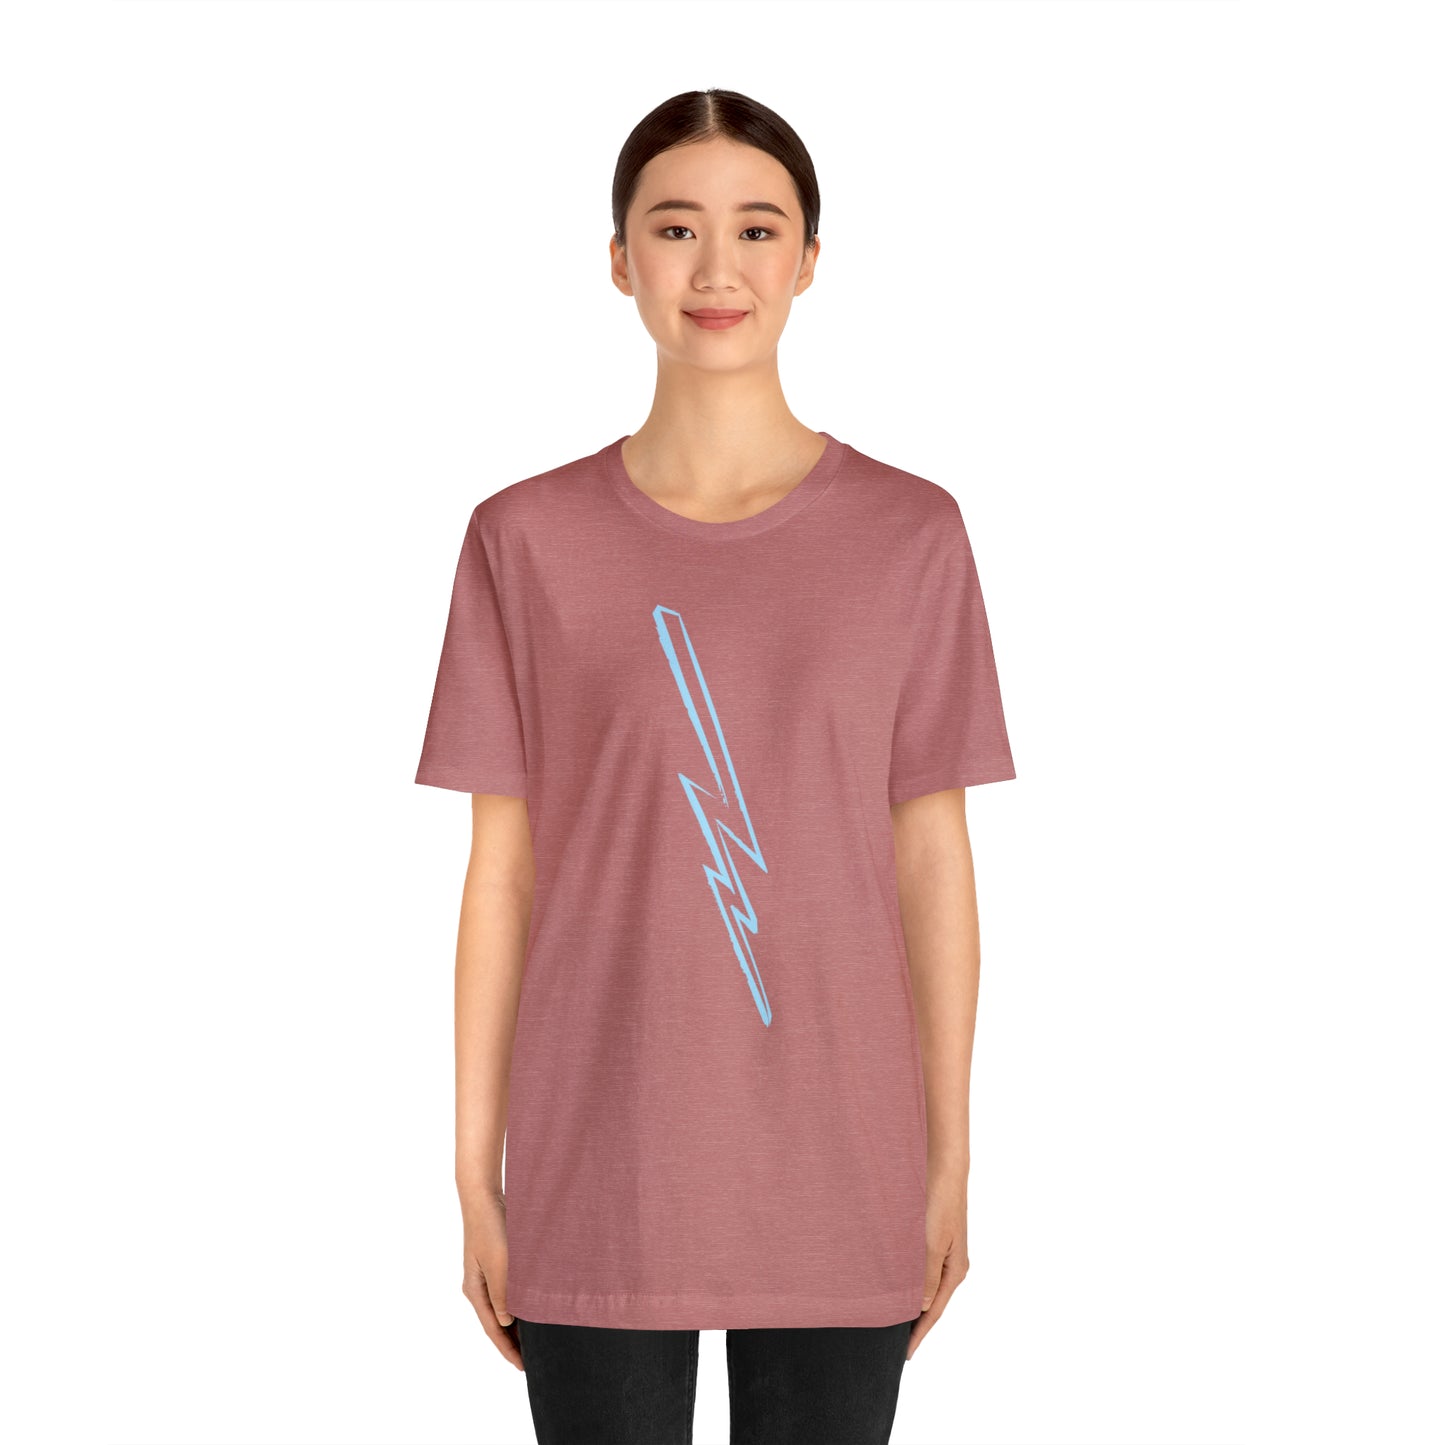 LectriciTee Light Blue Bolt Front Graphic, Full Logo Back Tee